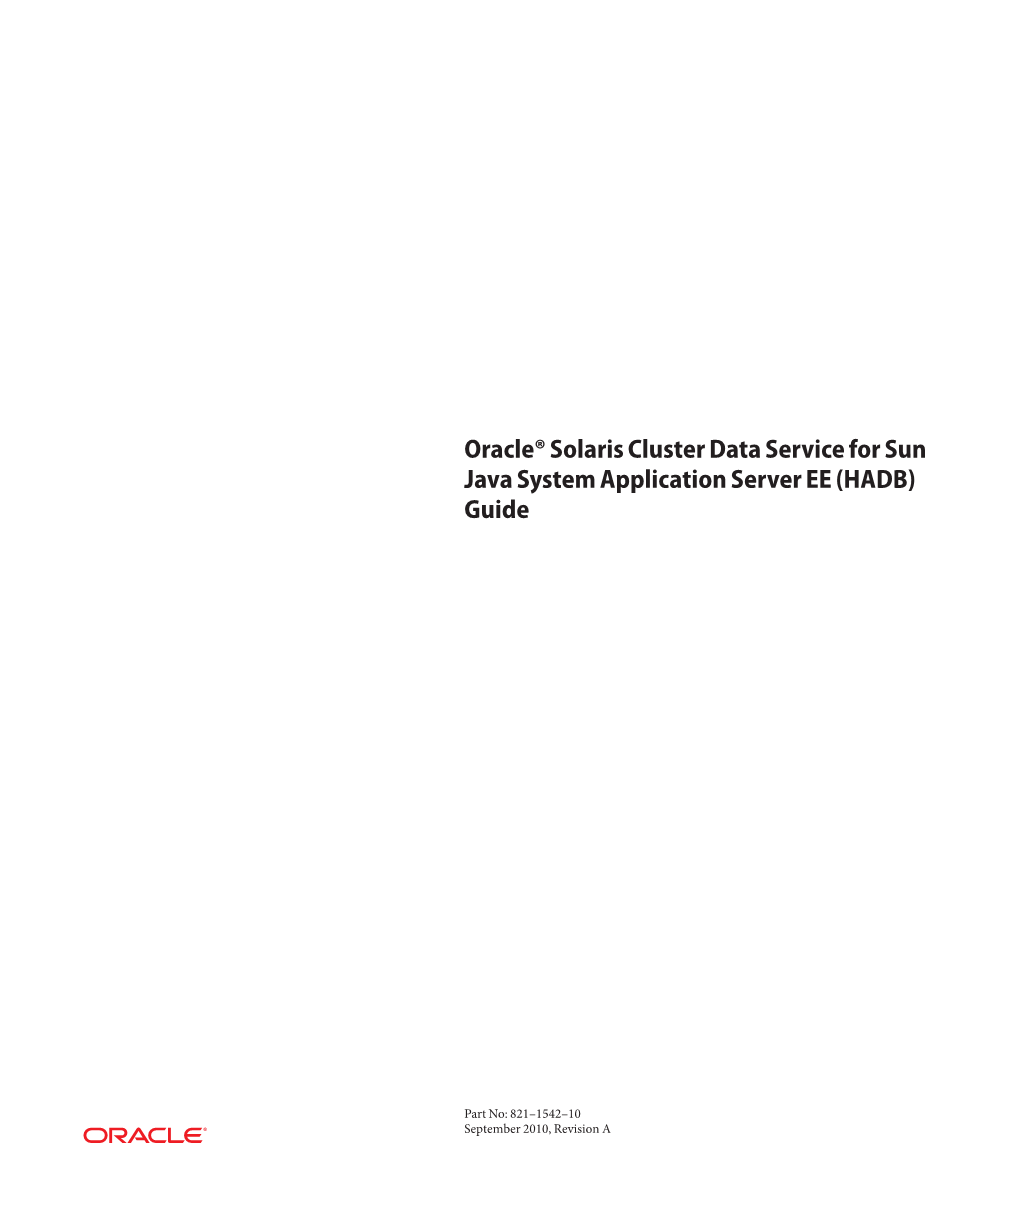 Oracle Solaris Cluster Data Service for Sun Java System Application Server EE (HADB) Guide • September 2010, Revision a Contents